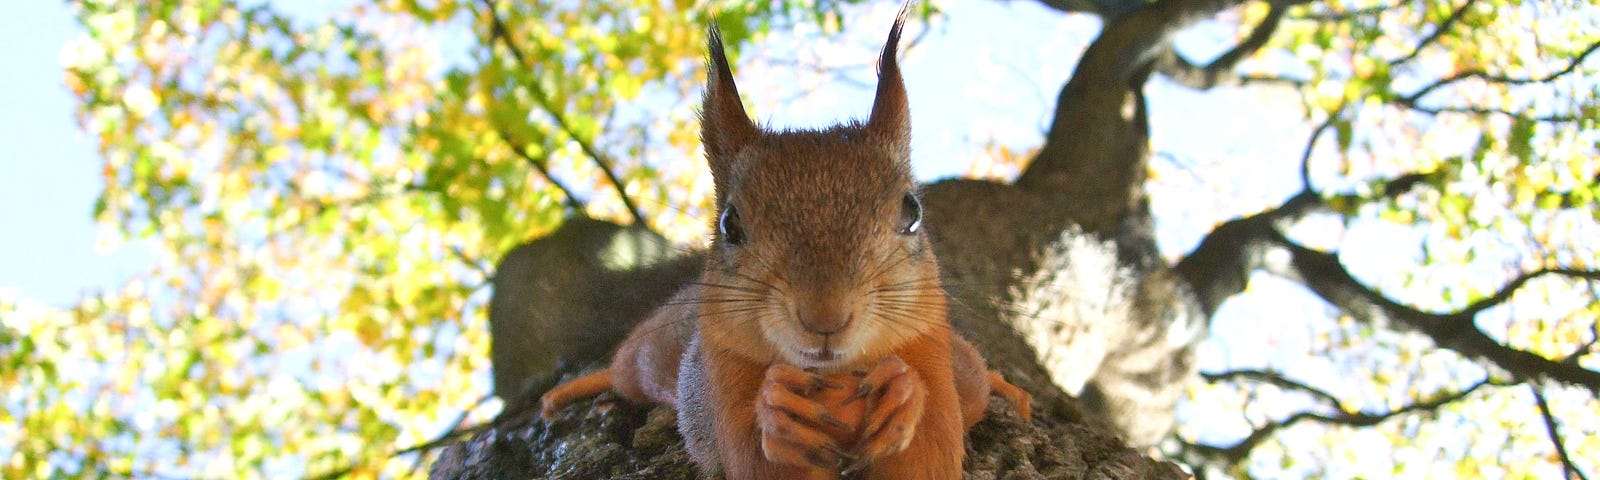 Shot of someone looking up at a tree. There is a funny squirrel holding a nut.